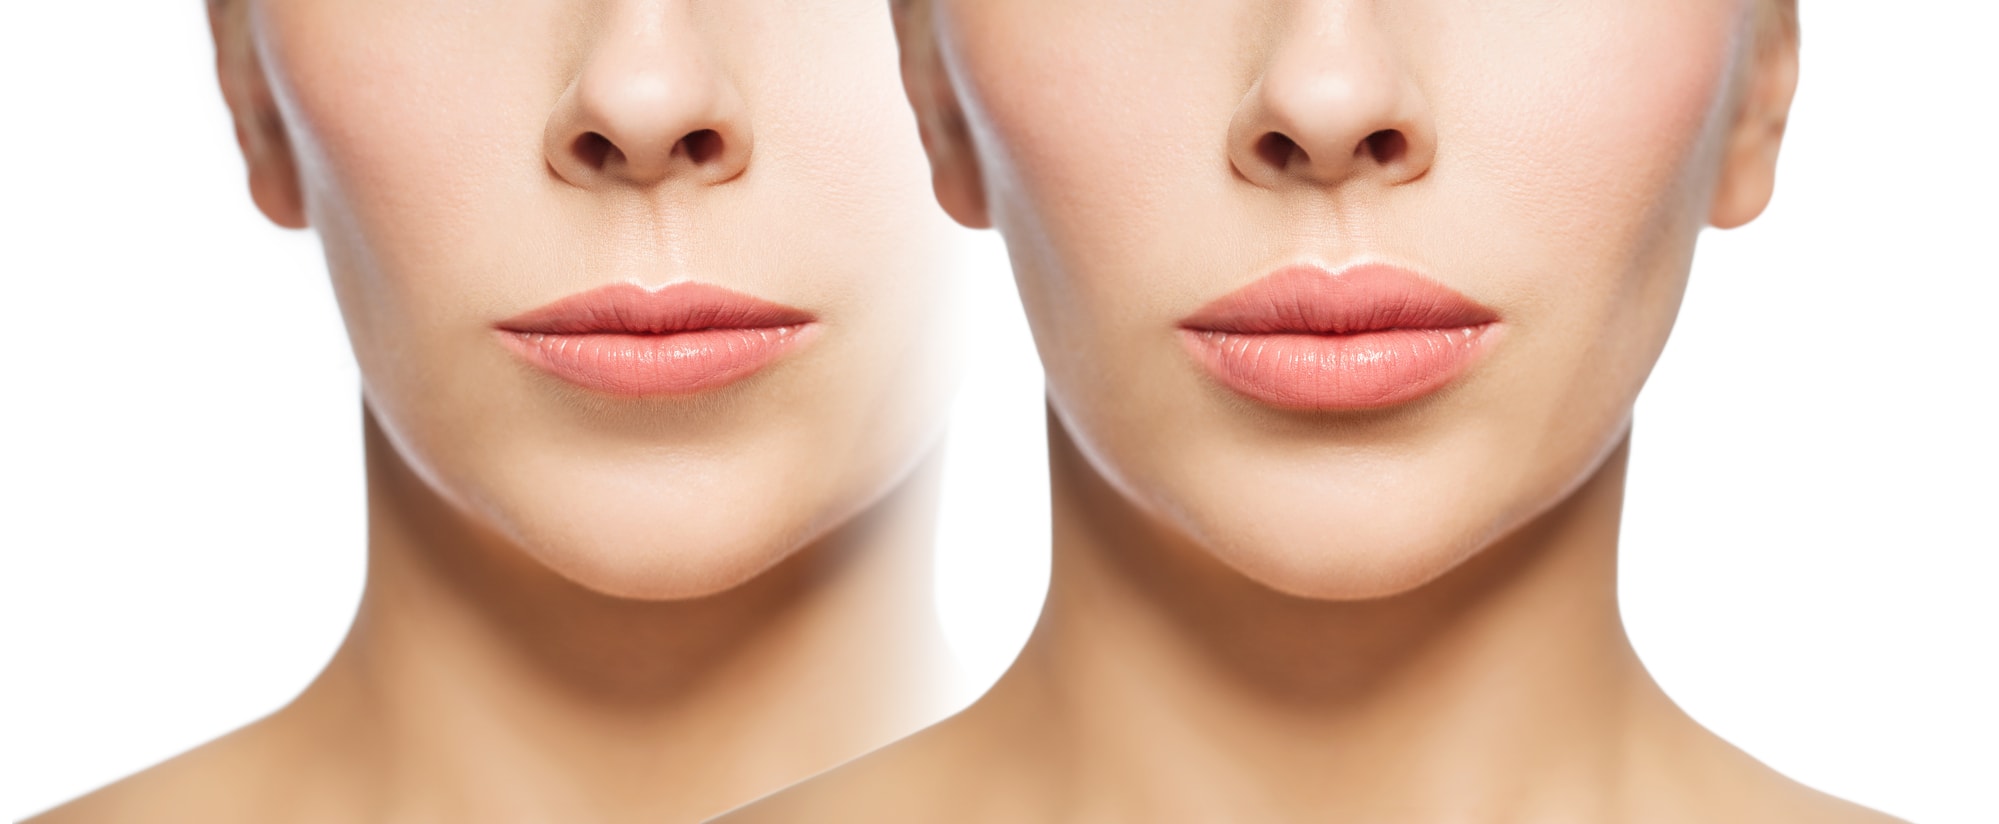 Before and after pictures of a woman who had laser lip treatment.